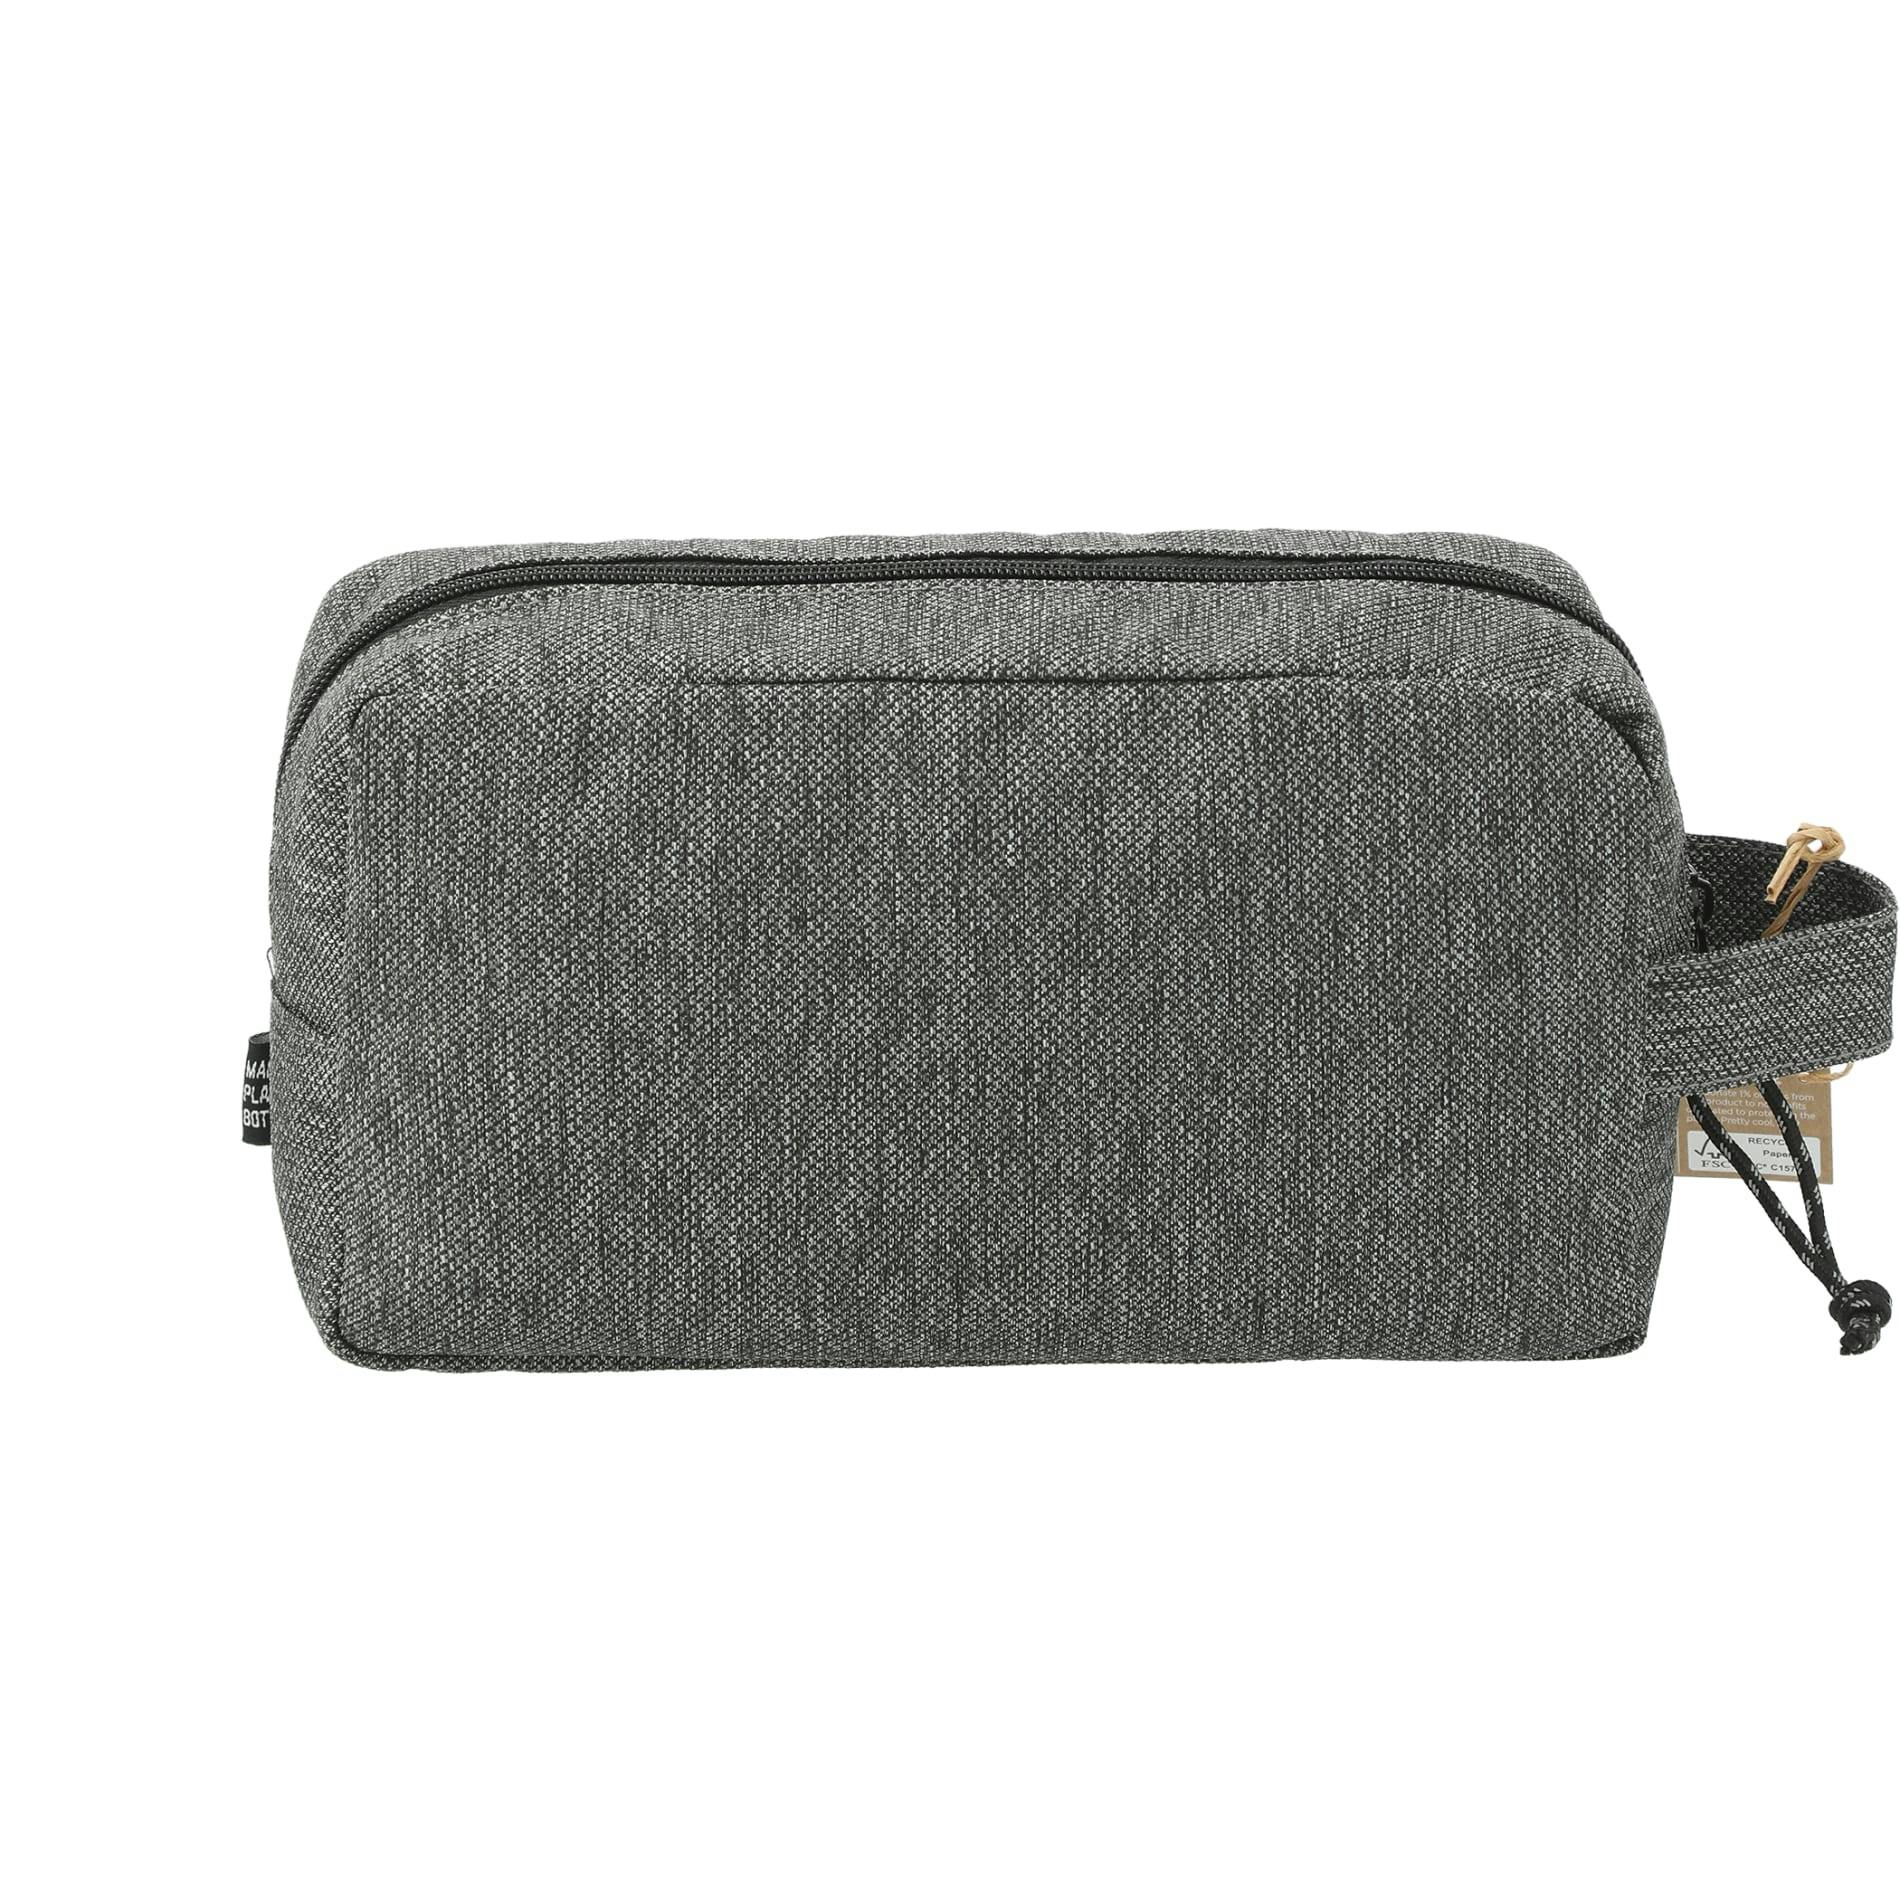 Vila Recycled Dopp Kit Pouch - additional Image 2